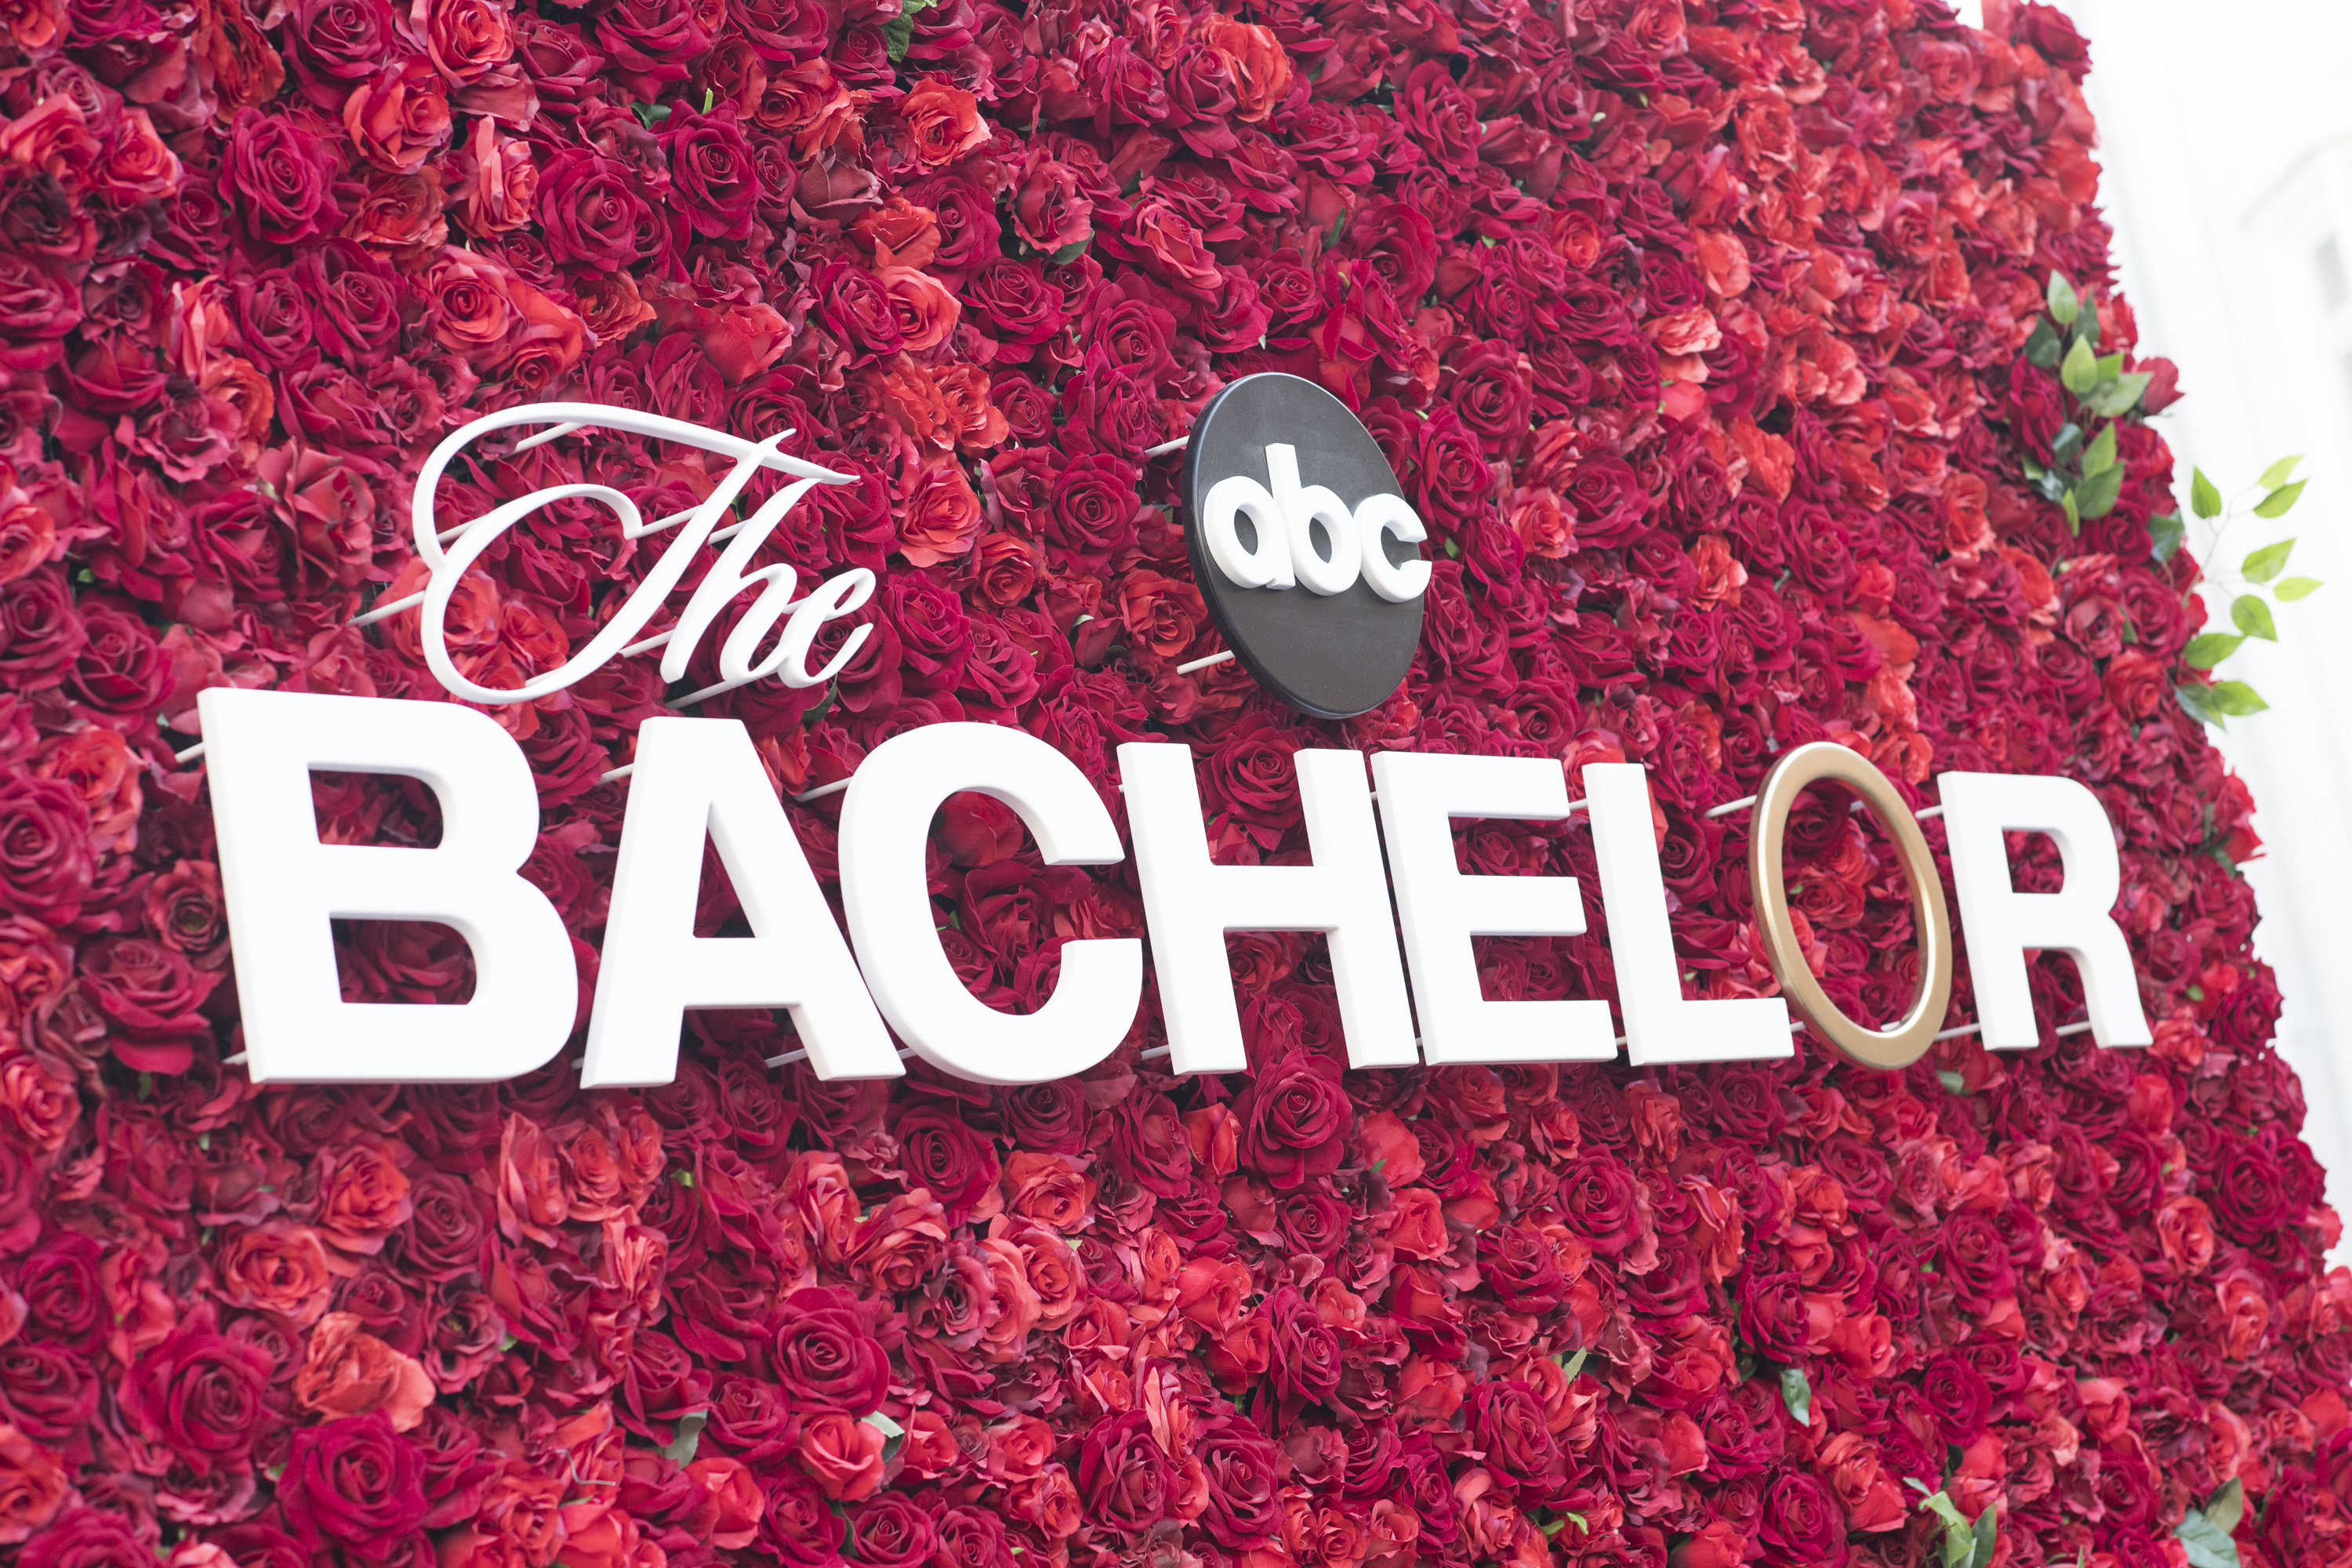 Who Is The Bachelor Winner 2019